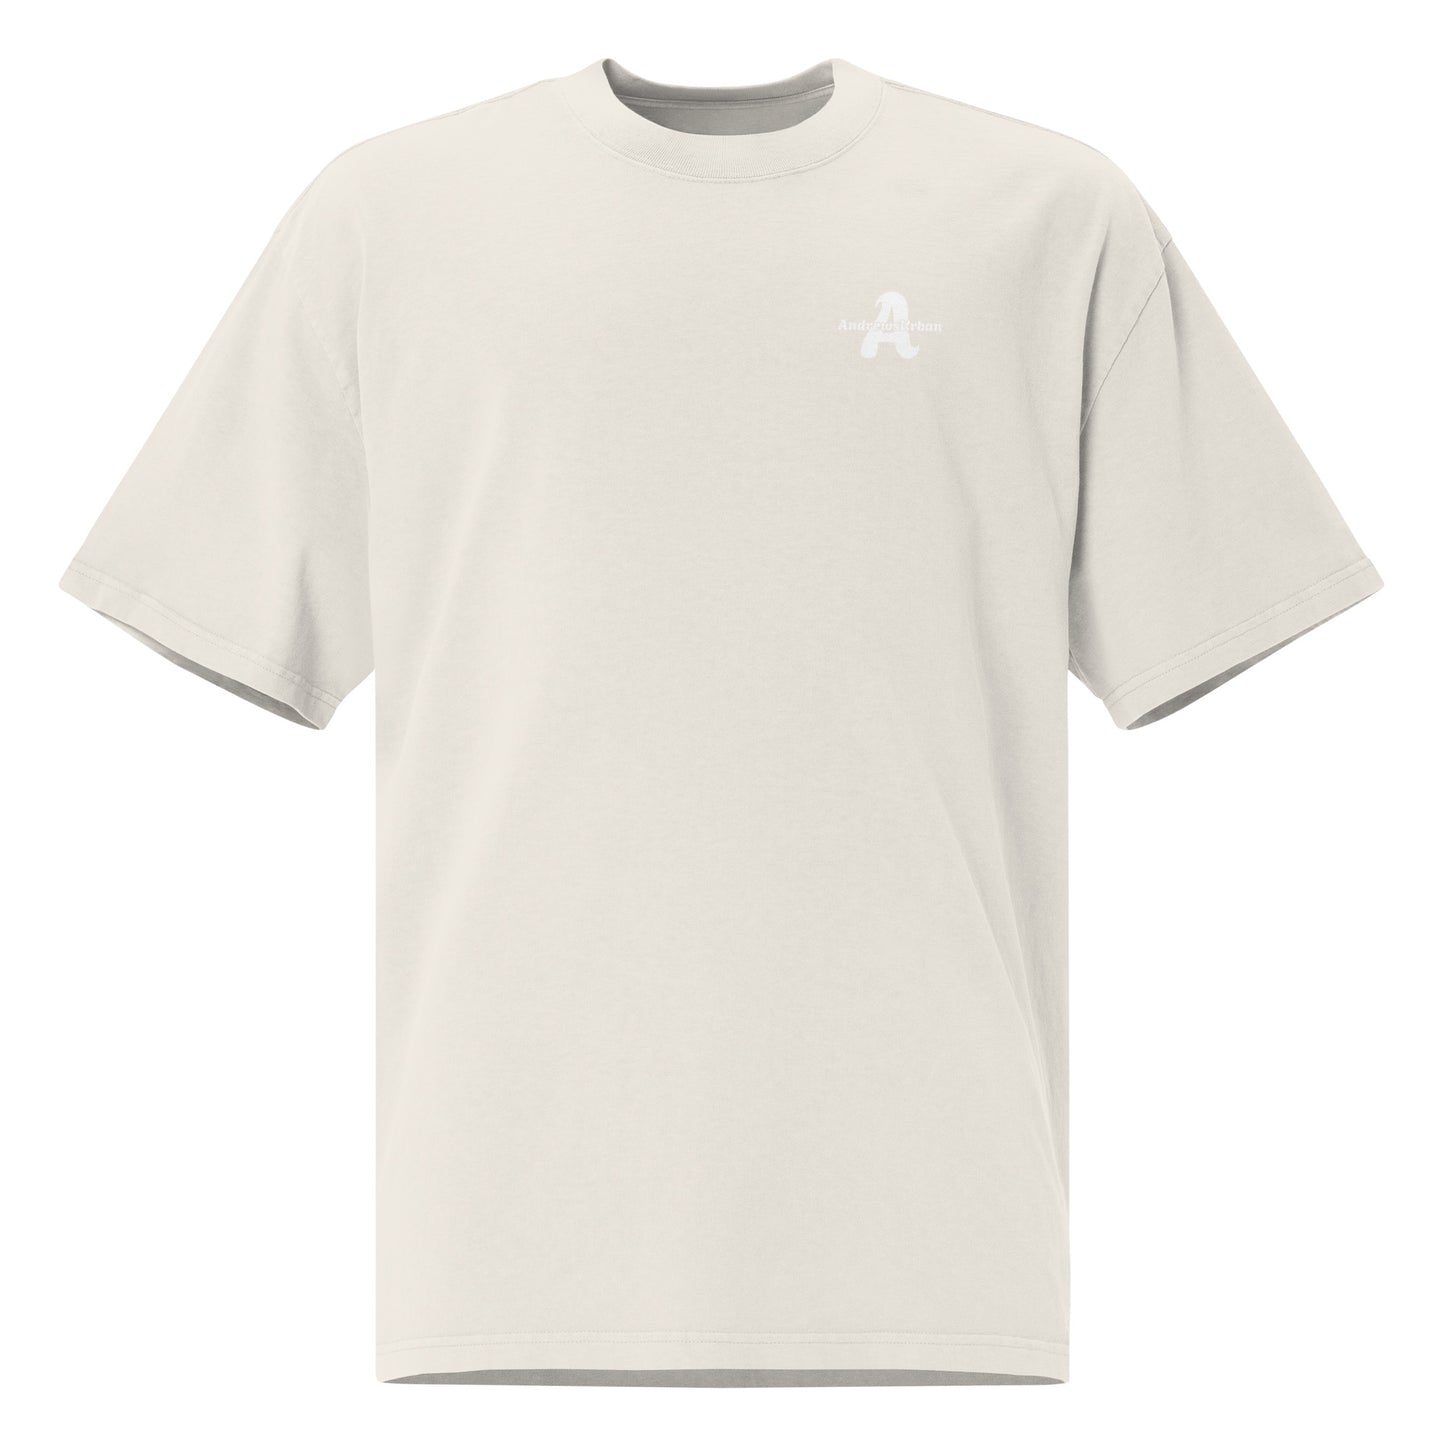 Andrews Unisex Oversized faded t-shirt in Four colors